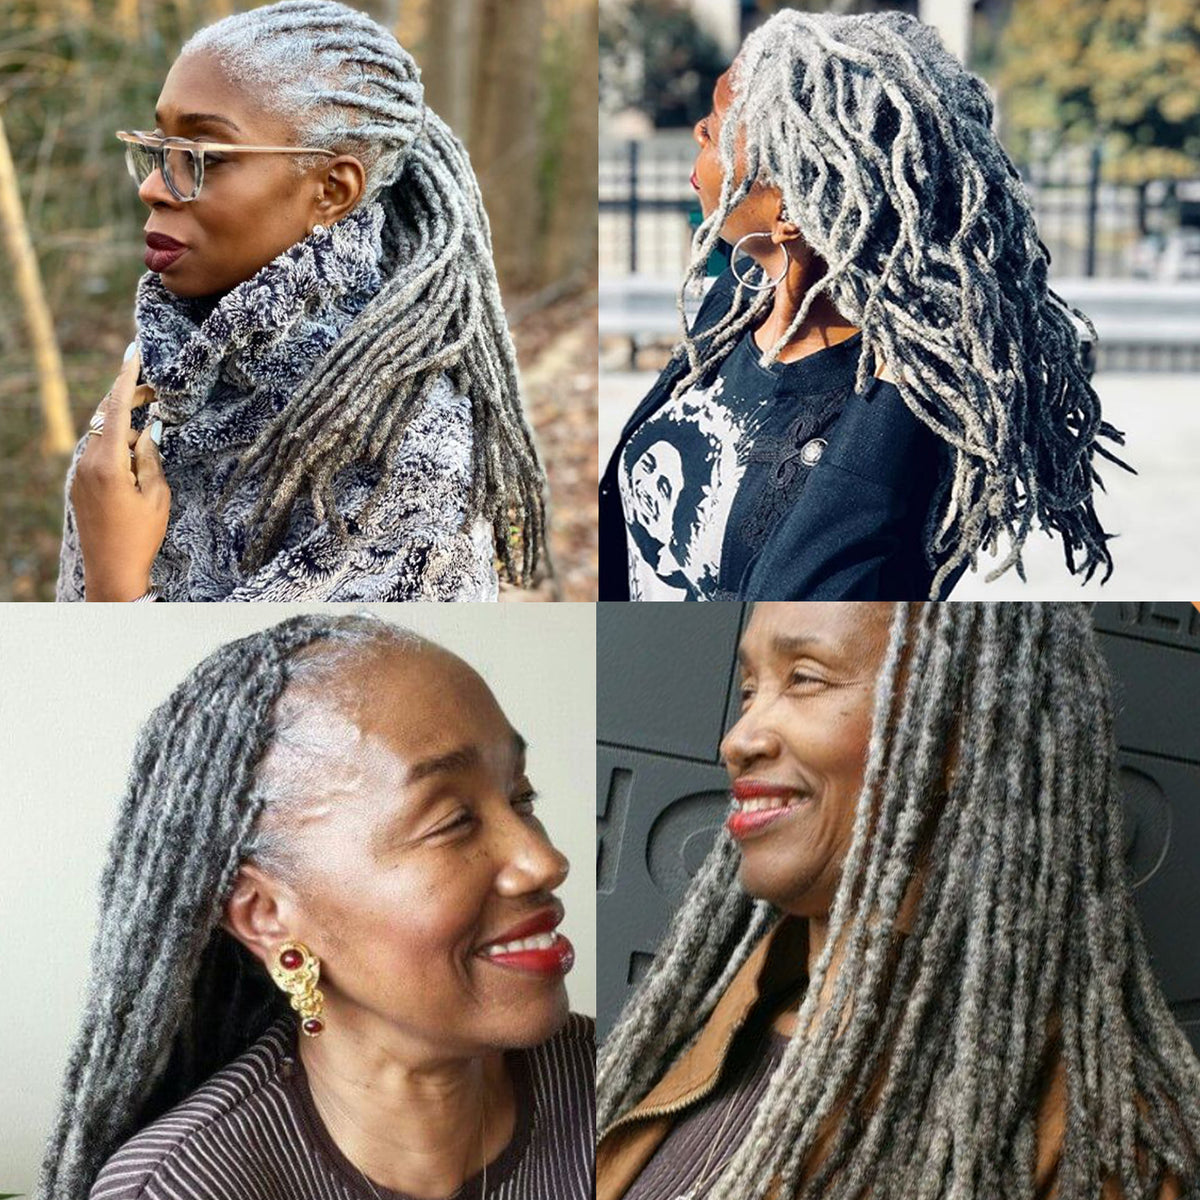 8 Inch 0.2cm 10 Strands Natural Human Hair Loc Extensions Handmade 100% Human Hair Dreadlock Extensions Bundle Dreads Extensions For Woman & Men Can Be Dyed/Bleached (Gray)